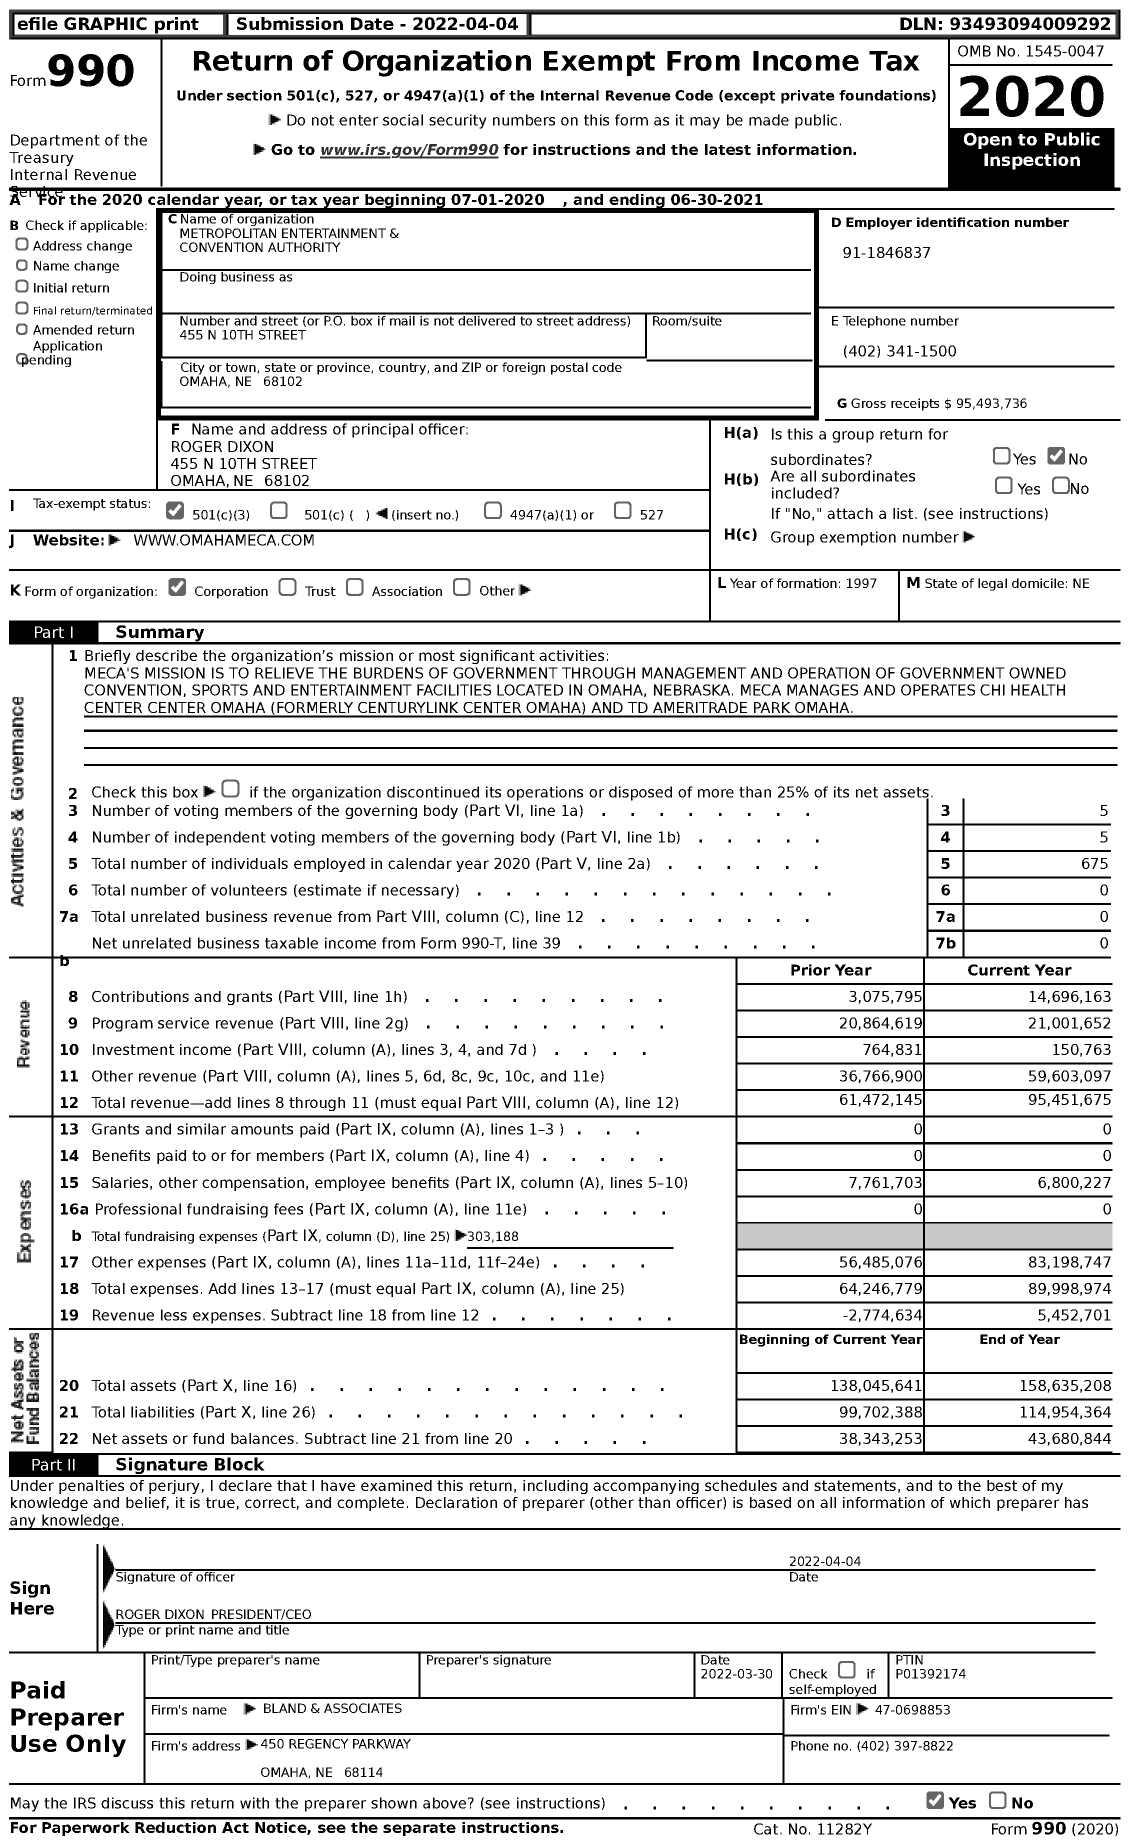 Image of first page of 2020 Form 990 for Metropolitan Entertainment and Convention Authority (MECA)